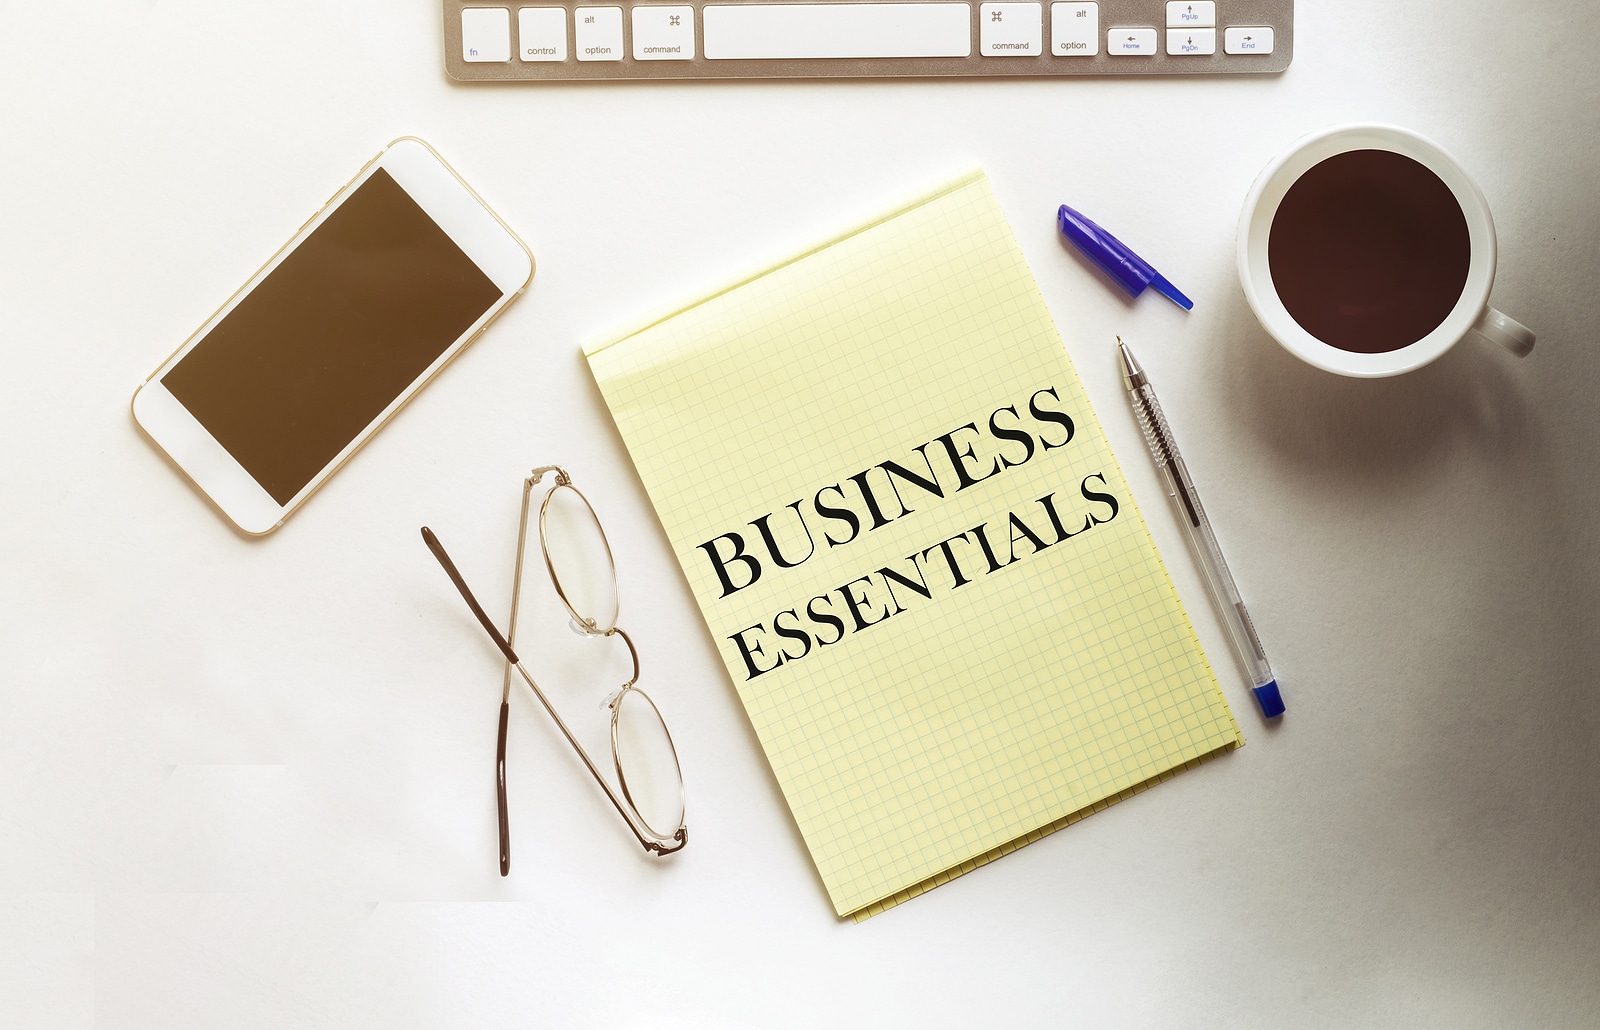 Business Essentials great idea that could bring you millions of customers